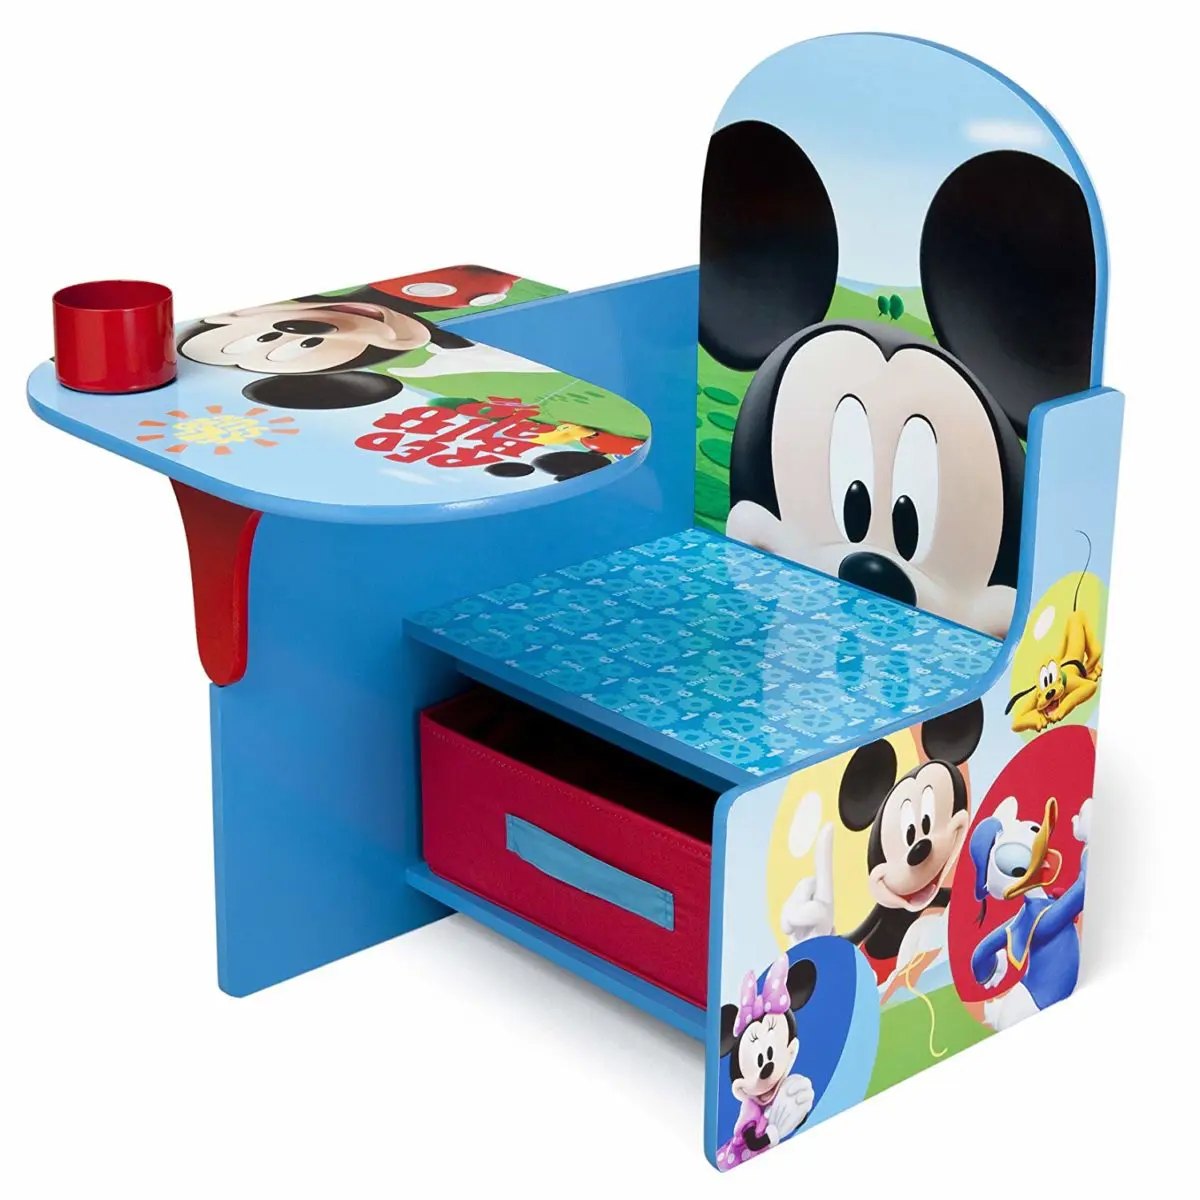 Delta Children Chair Desk With Storage Bin - Top Toys and Gifts for Four Year Old Boys 1